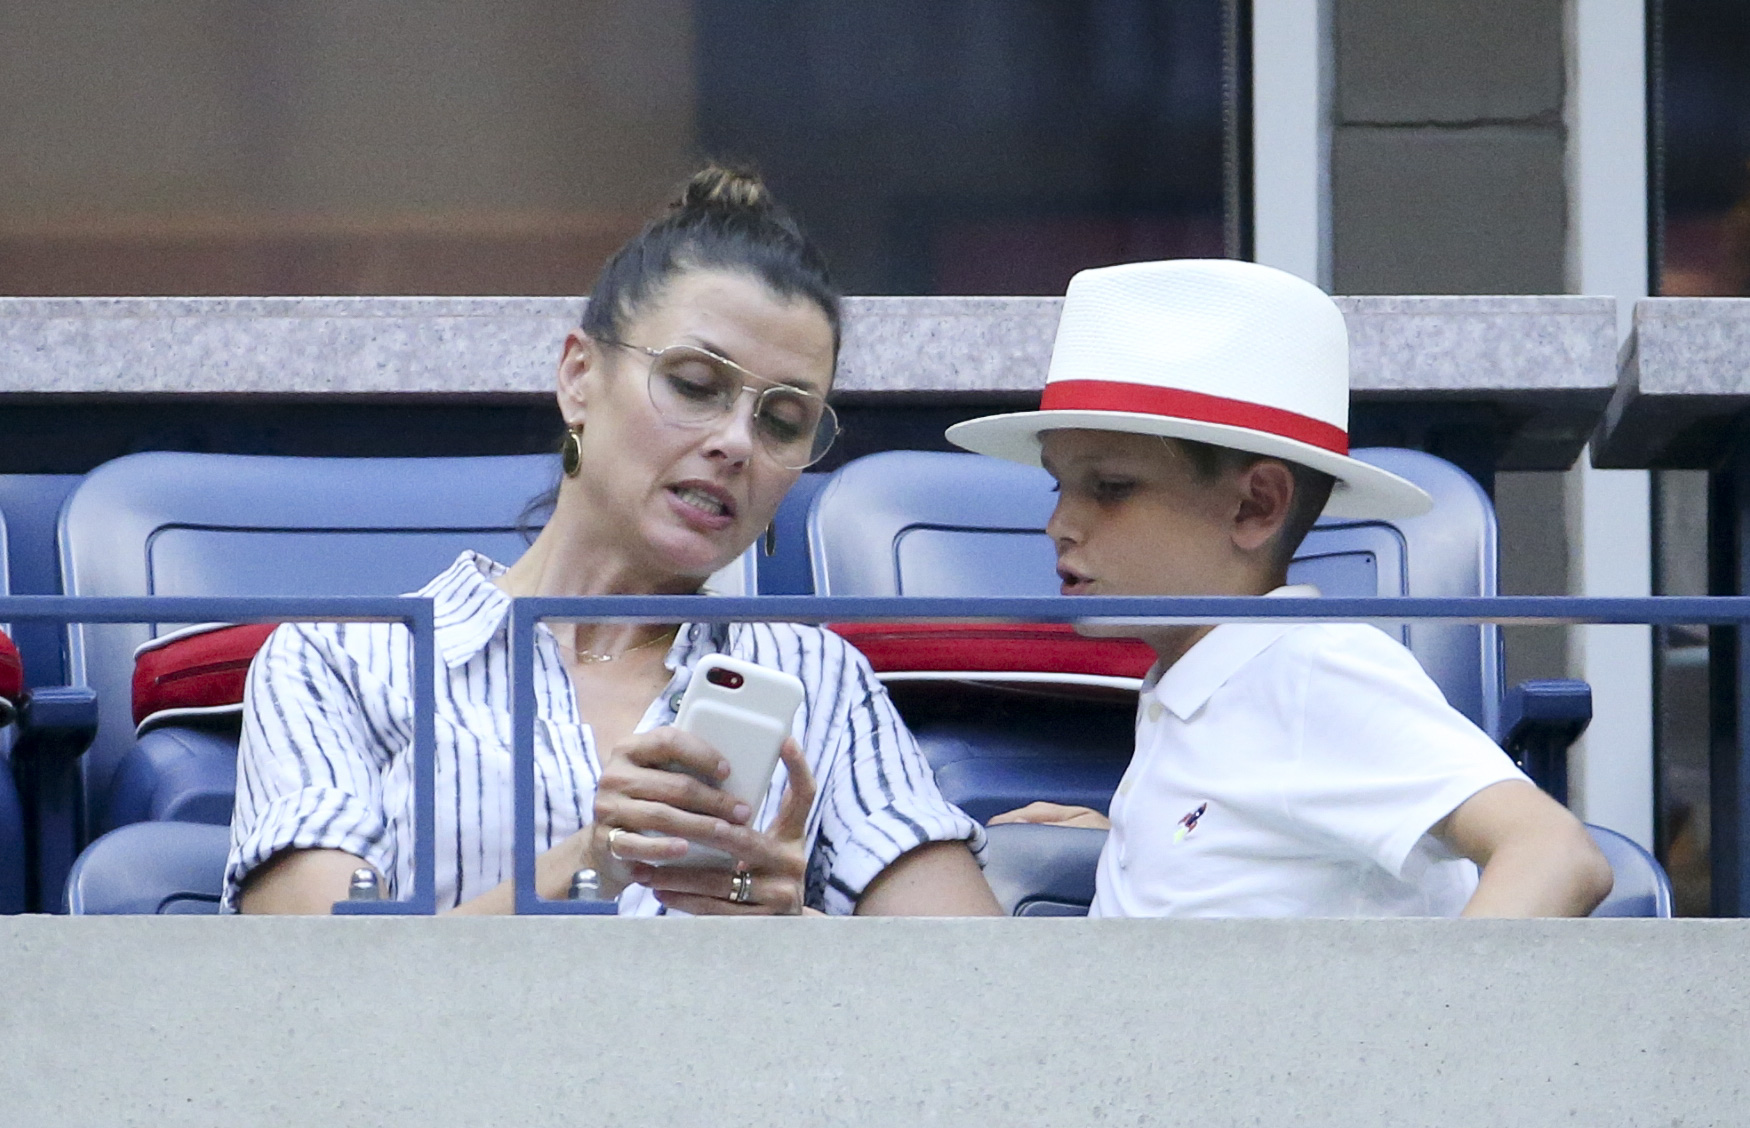 Bridget Moynahan with her son John Edward Thomas Moynahan at the 2018 tennis US Open on August 29, 2018 in Queens, New York City | Source: Getty Images